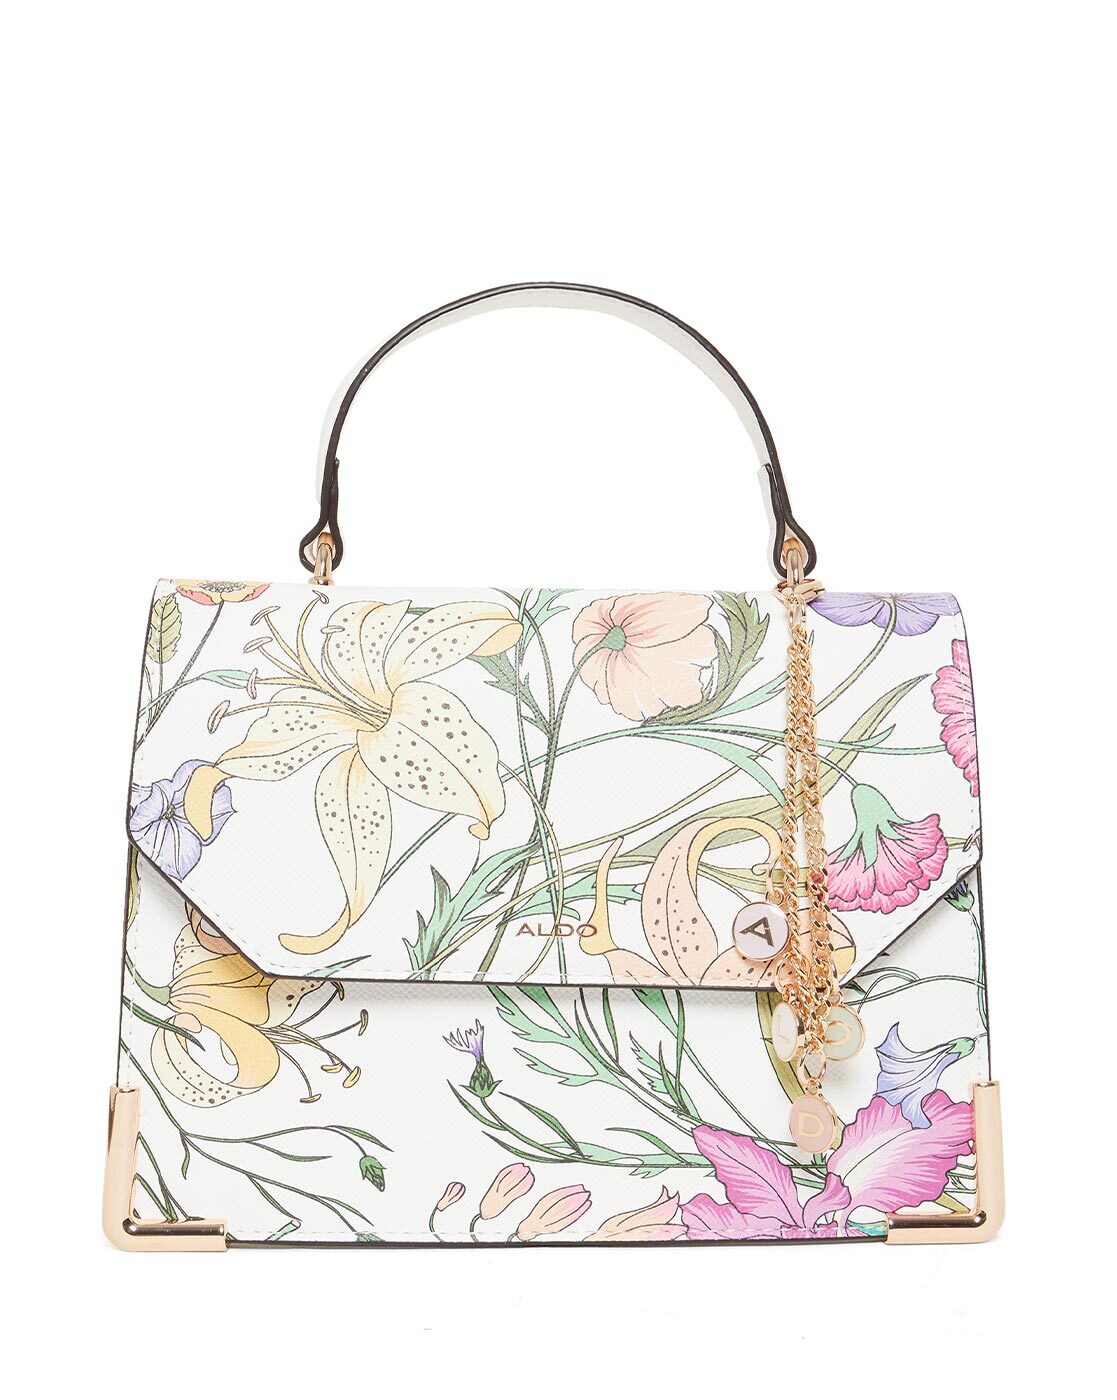 Luxury Designer Speedy 30 Graffiti Tote Bag For Women Boston Aldo Handbags  With Monogram, Leather And Canvas Pillows, And Crossbody Strap From  One1bags8, $57 | DHgate.Com